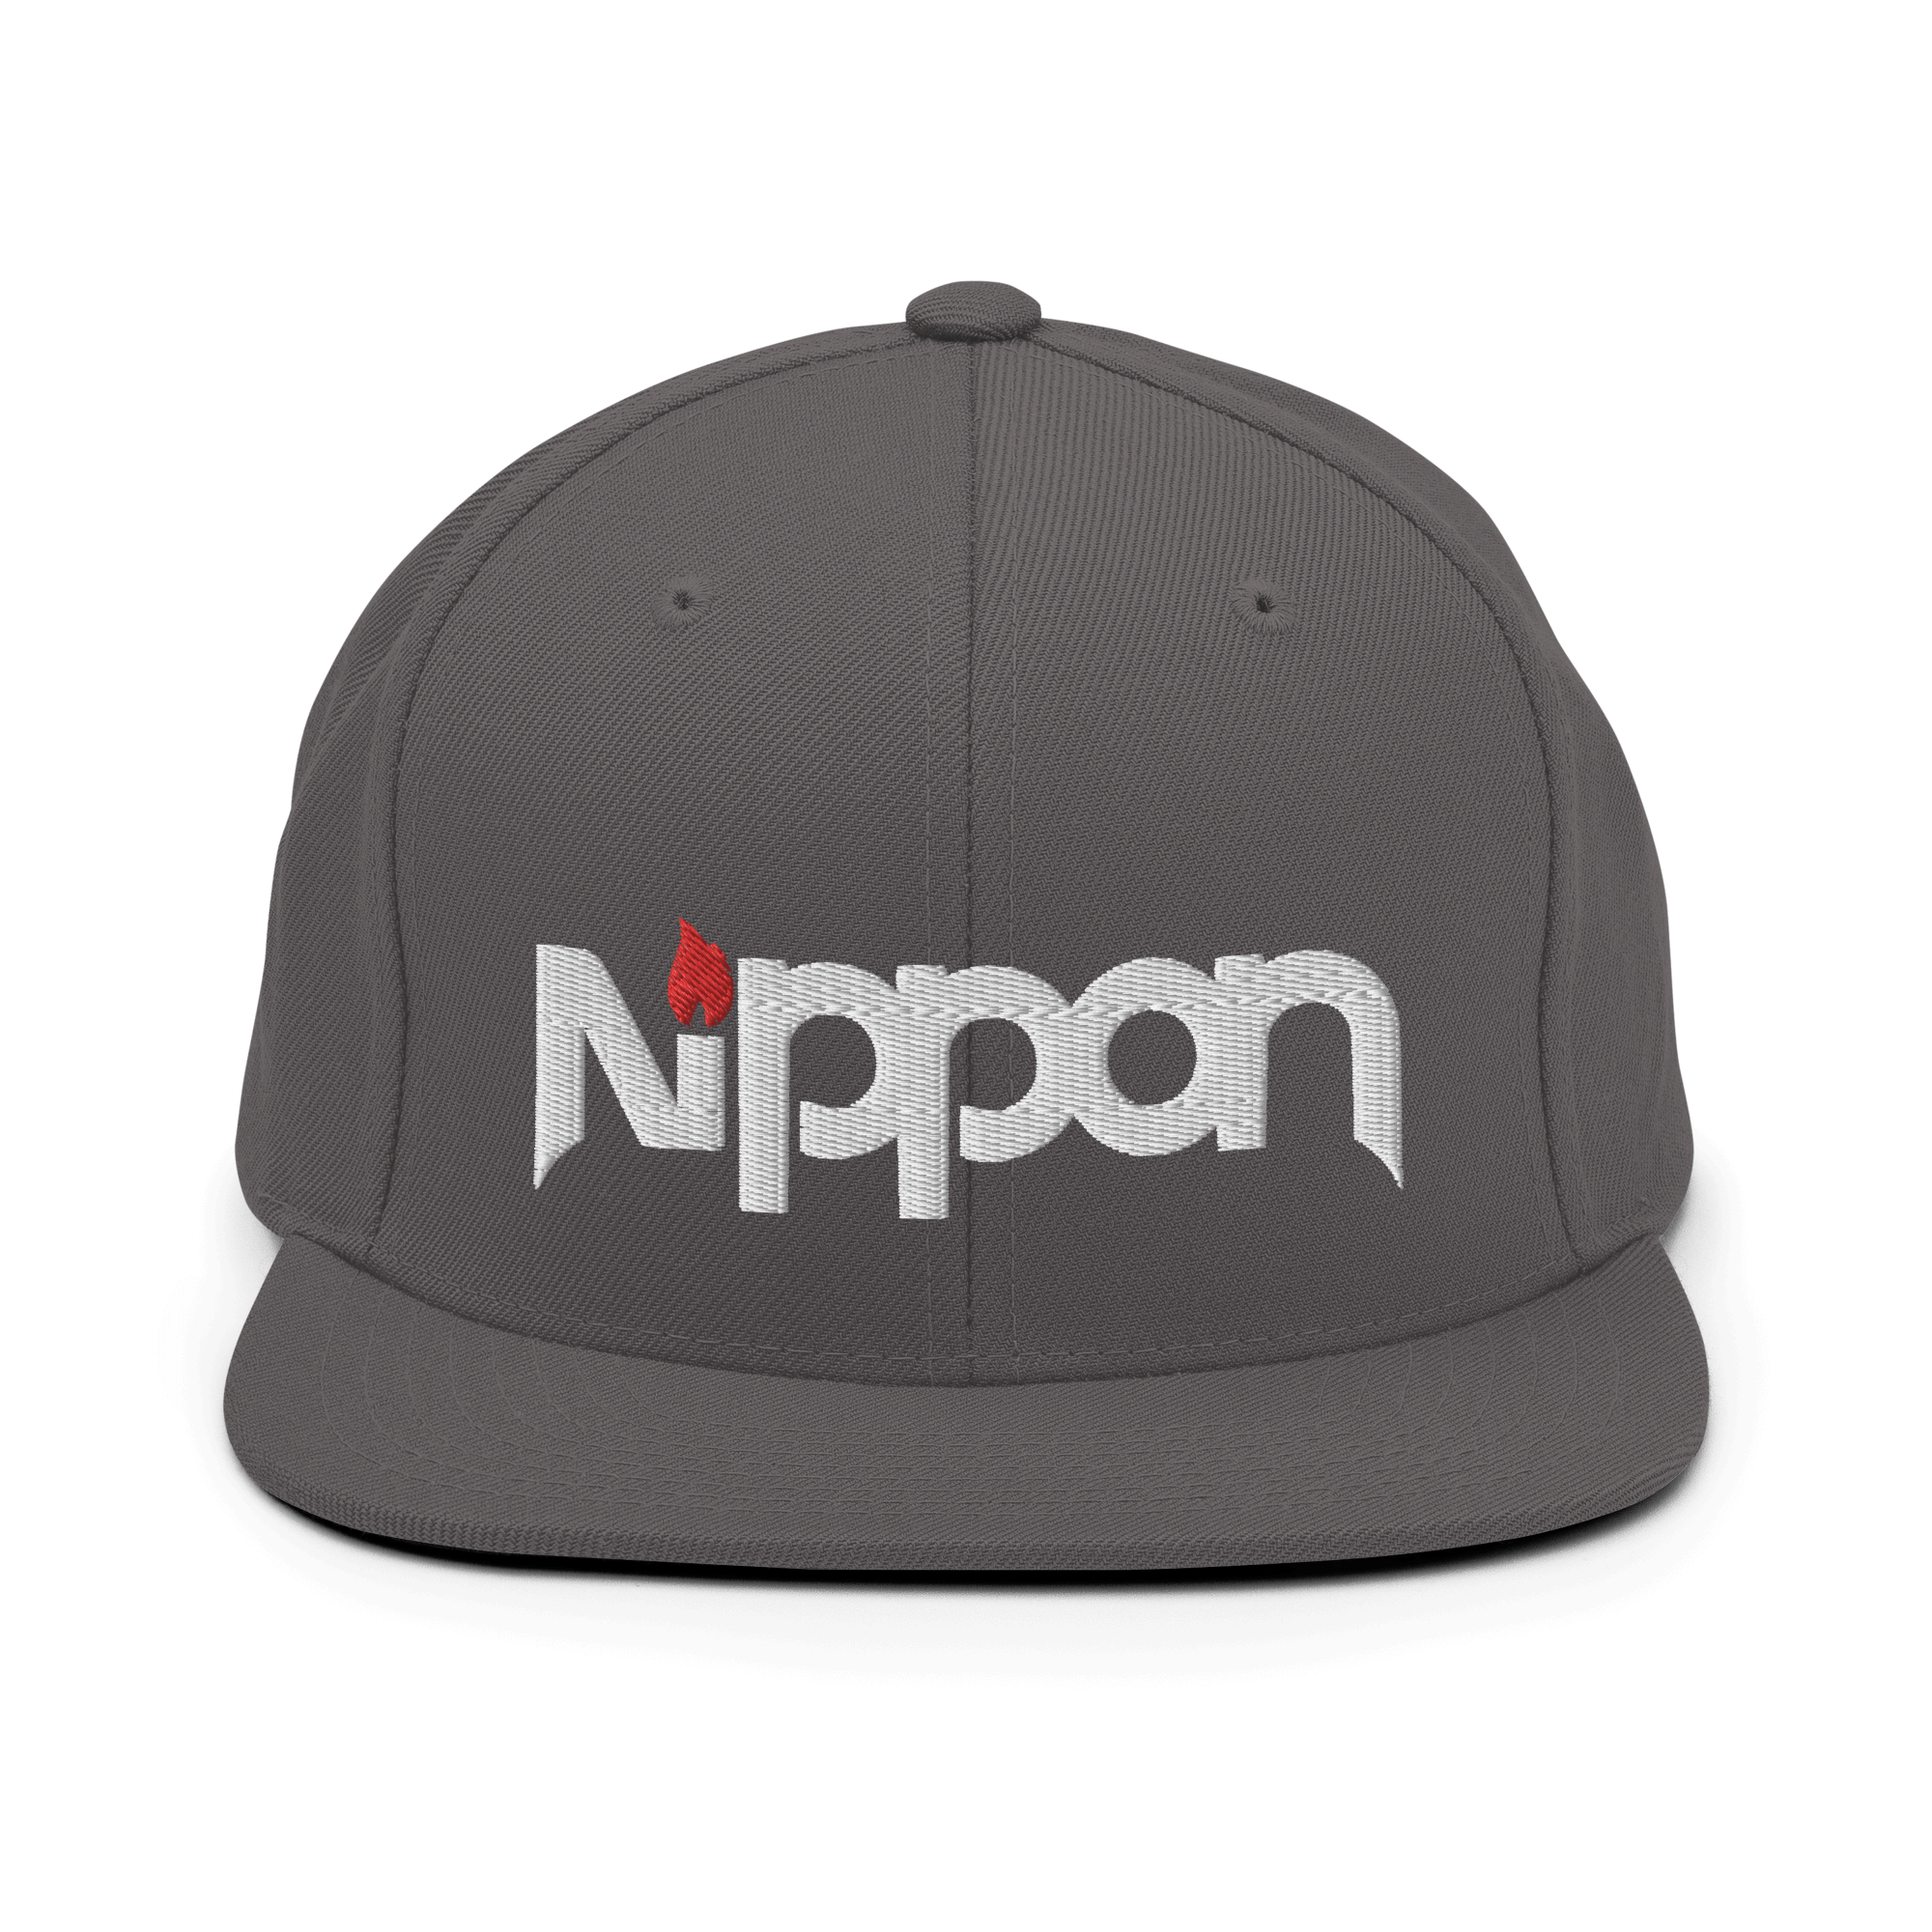 Nippon Snapback CapUnleash your style with the Nippon Snapback Cap – a classic fit, flat brim, and full buckram structure that captures the essence of timeless cool. The adjustable snap closure ensures a comfortable, one-size-fits-most fit. Crafted exclus